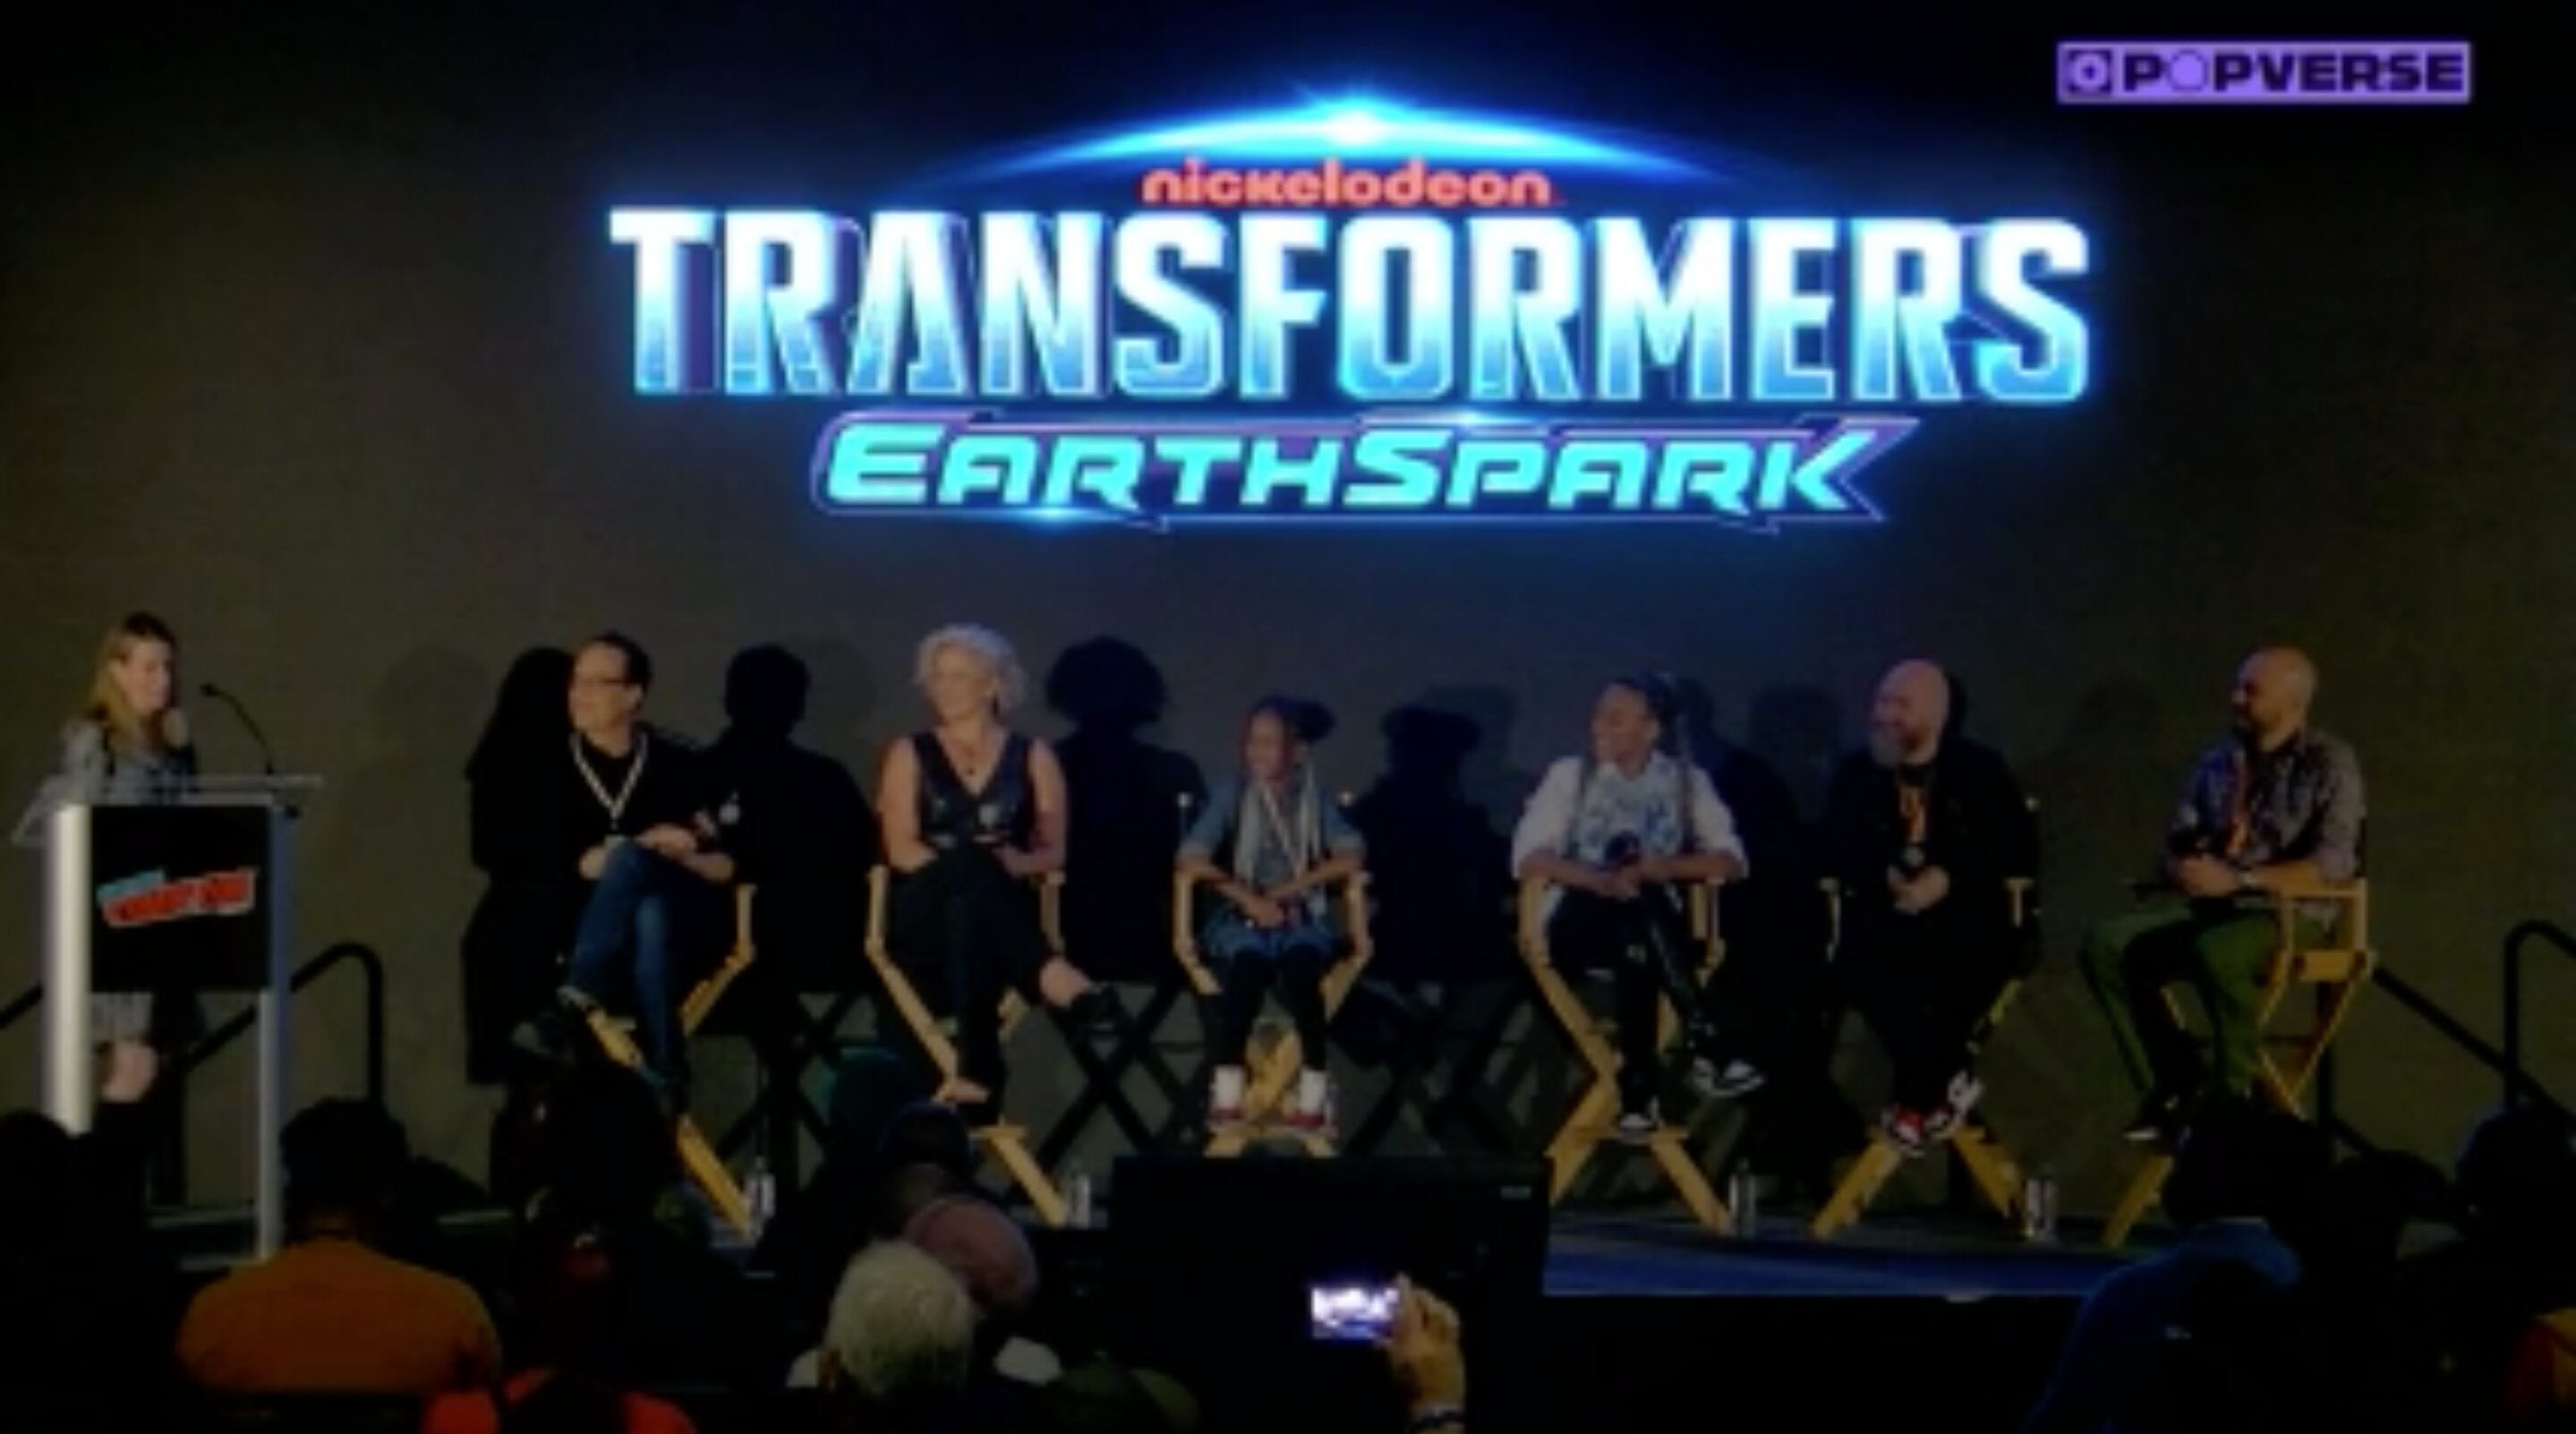 Image for Diedrich Bader leads Nickelodeon’s Transformers: EarthSpark panel - watch it live here!